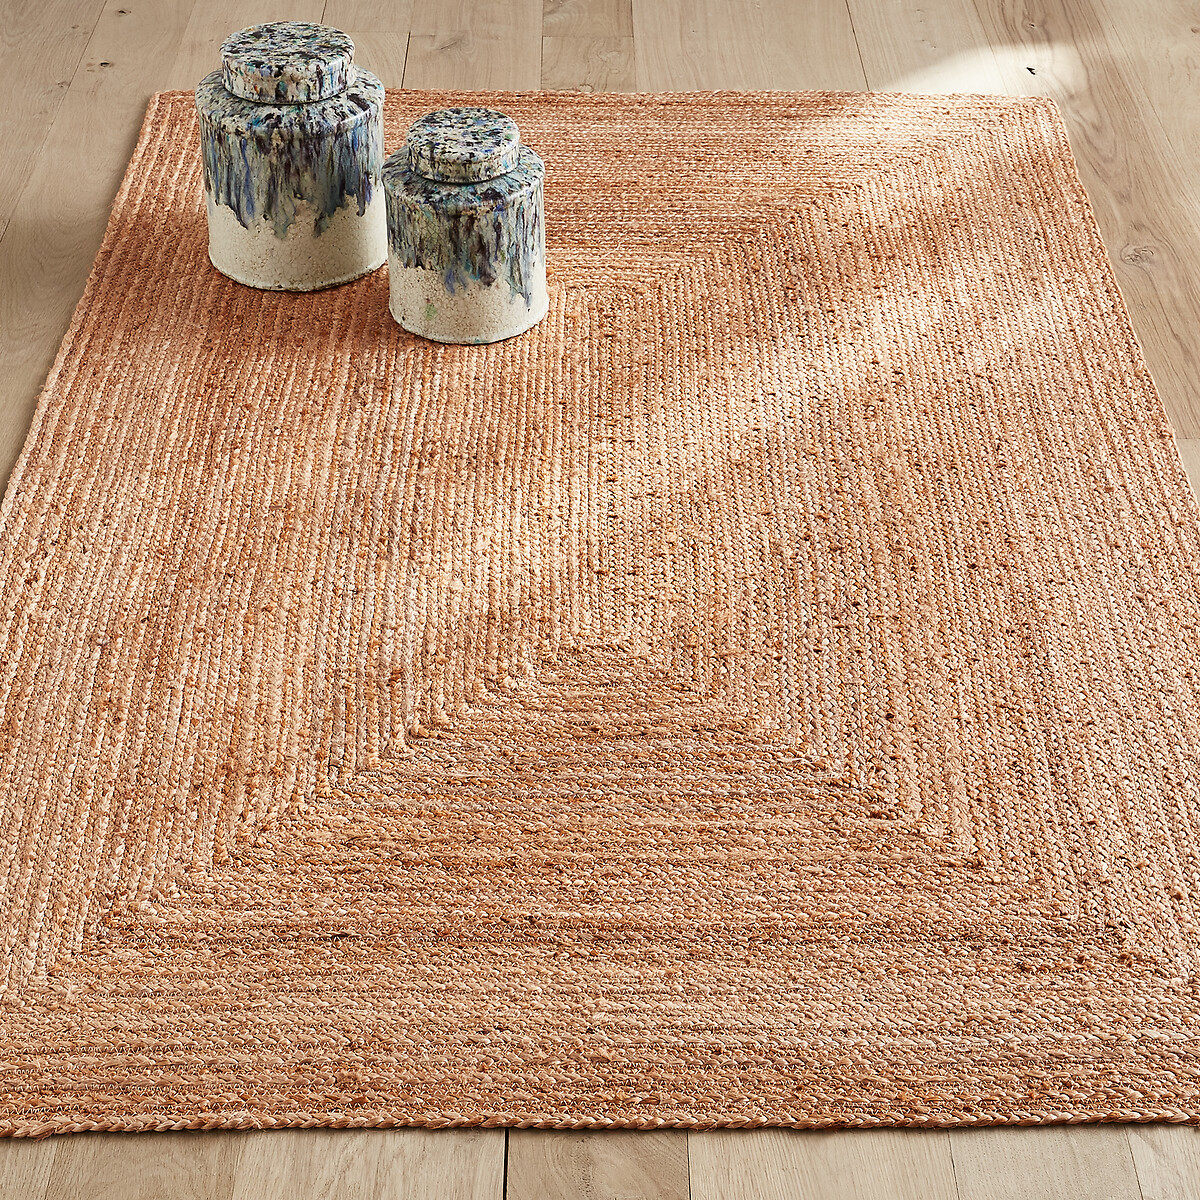 Hempy Hand Woven Jute Rug Natural Am Pm, Are Jute Rugs Comfortable